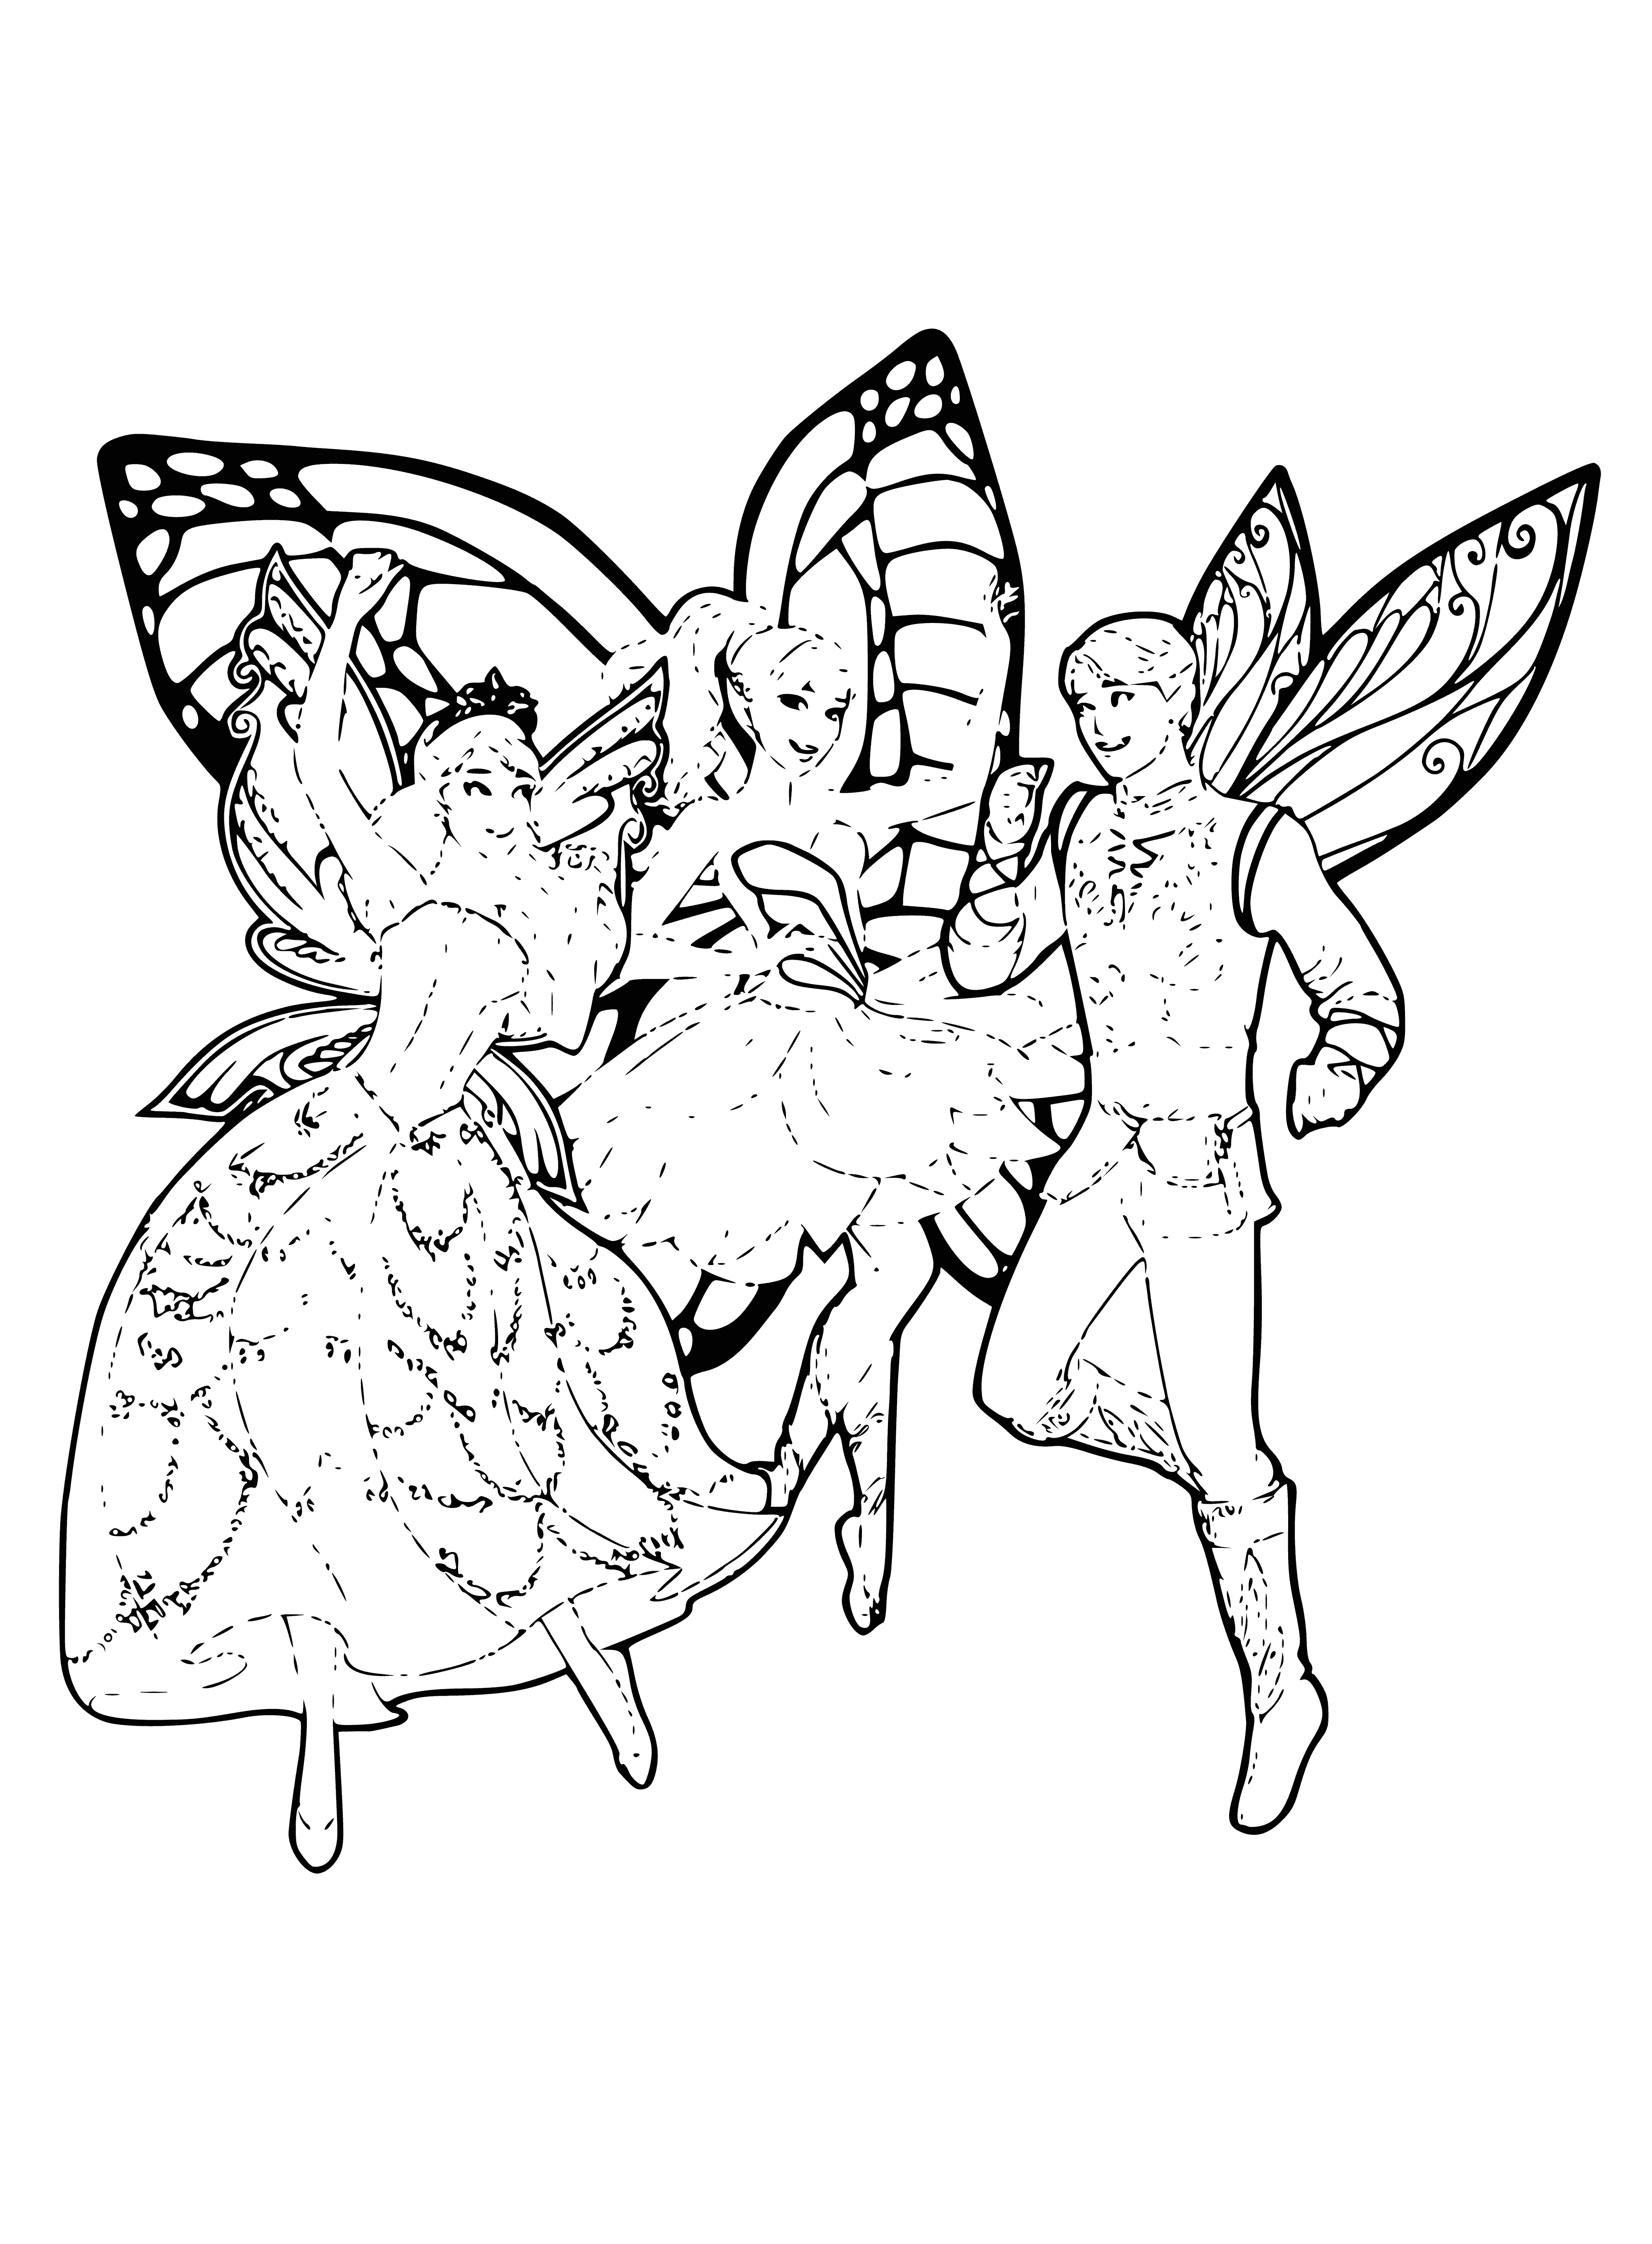 Fairy Butterflies coloring page